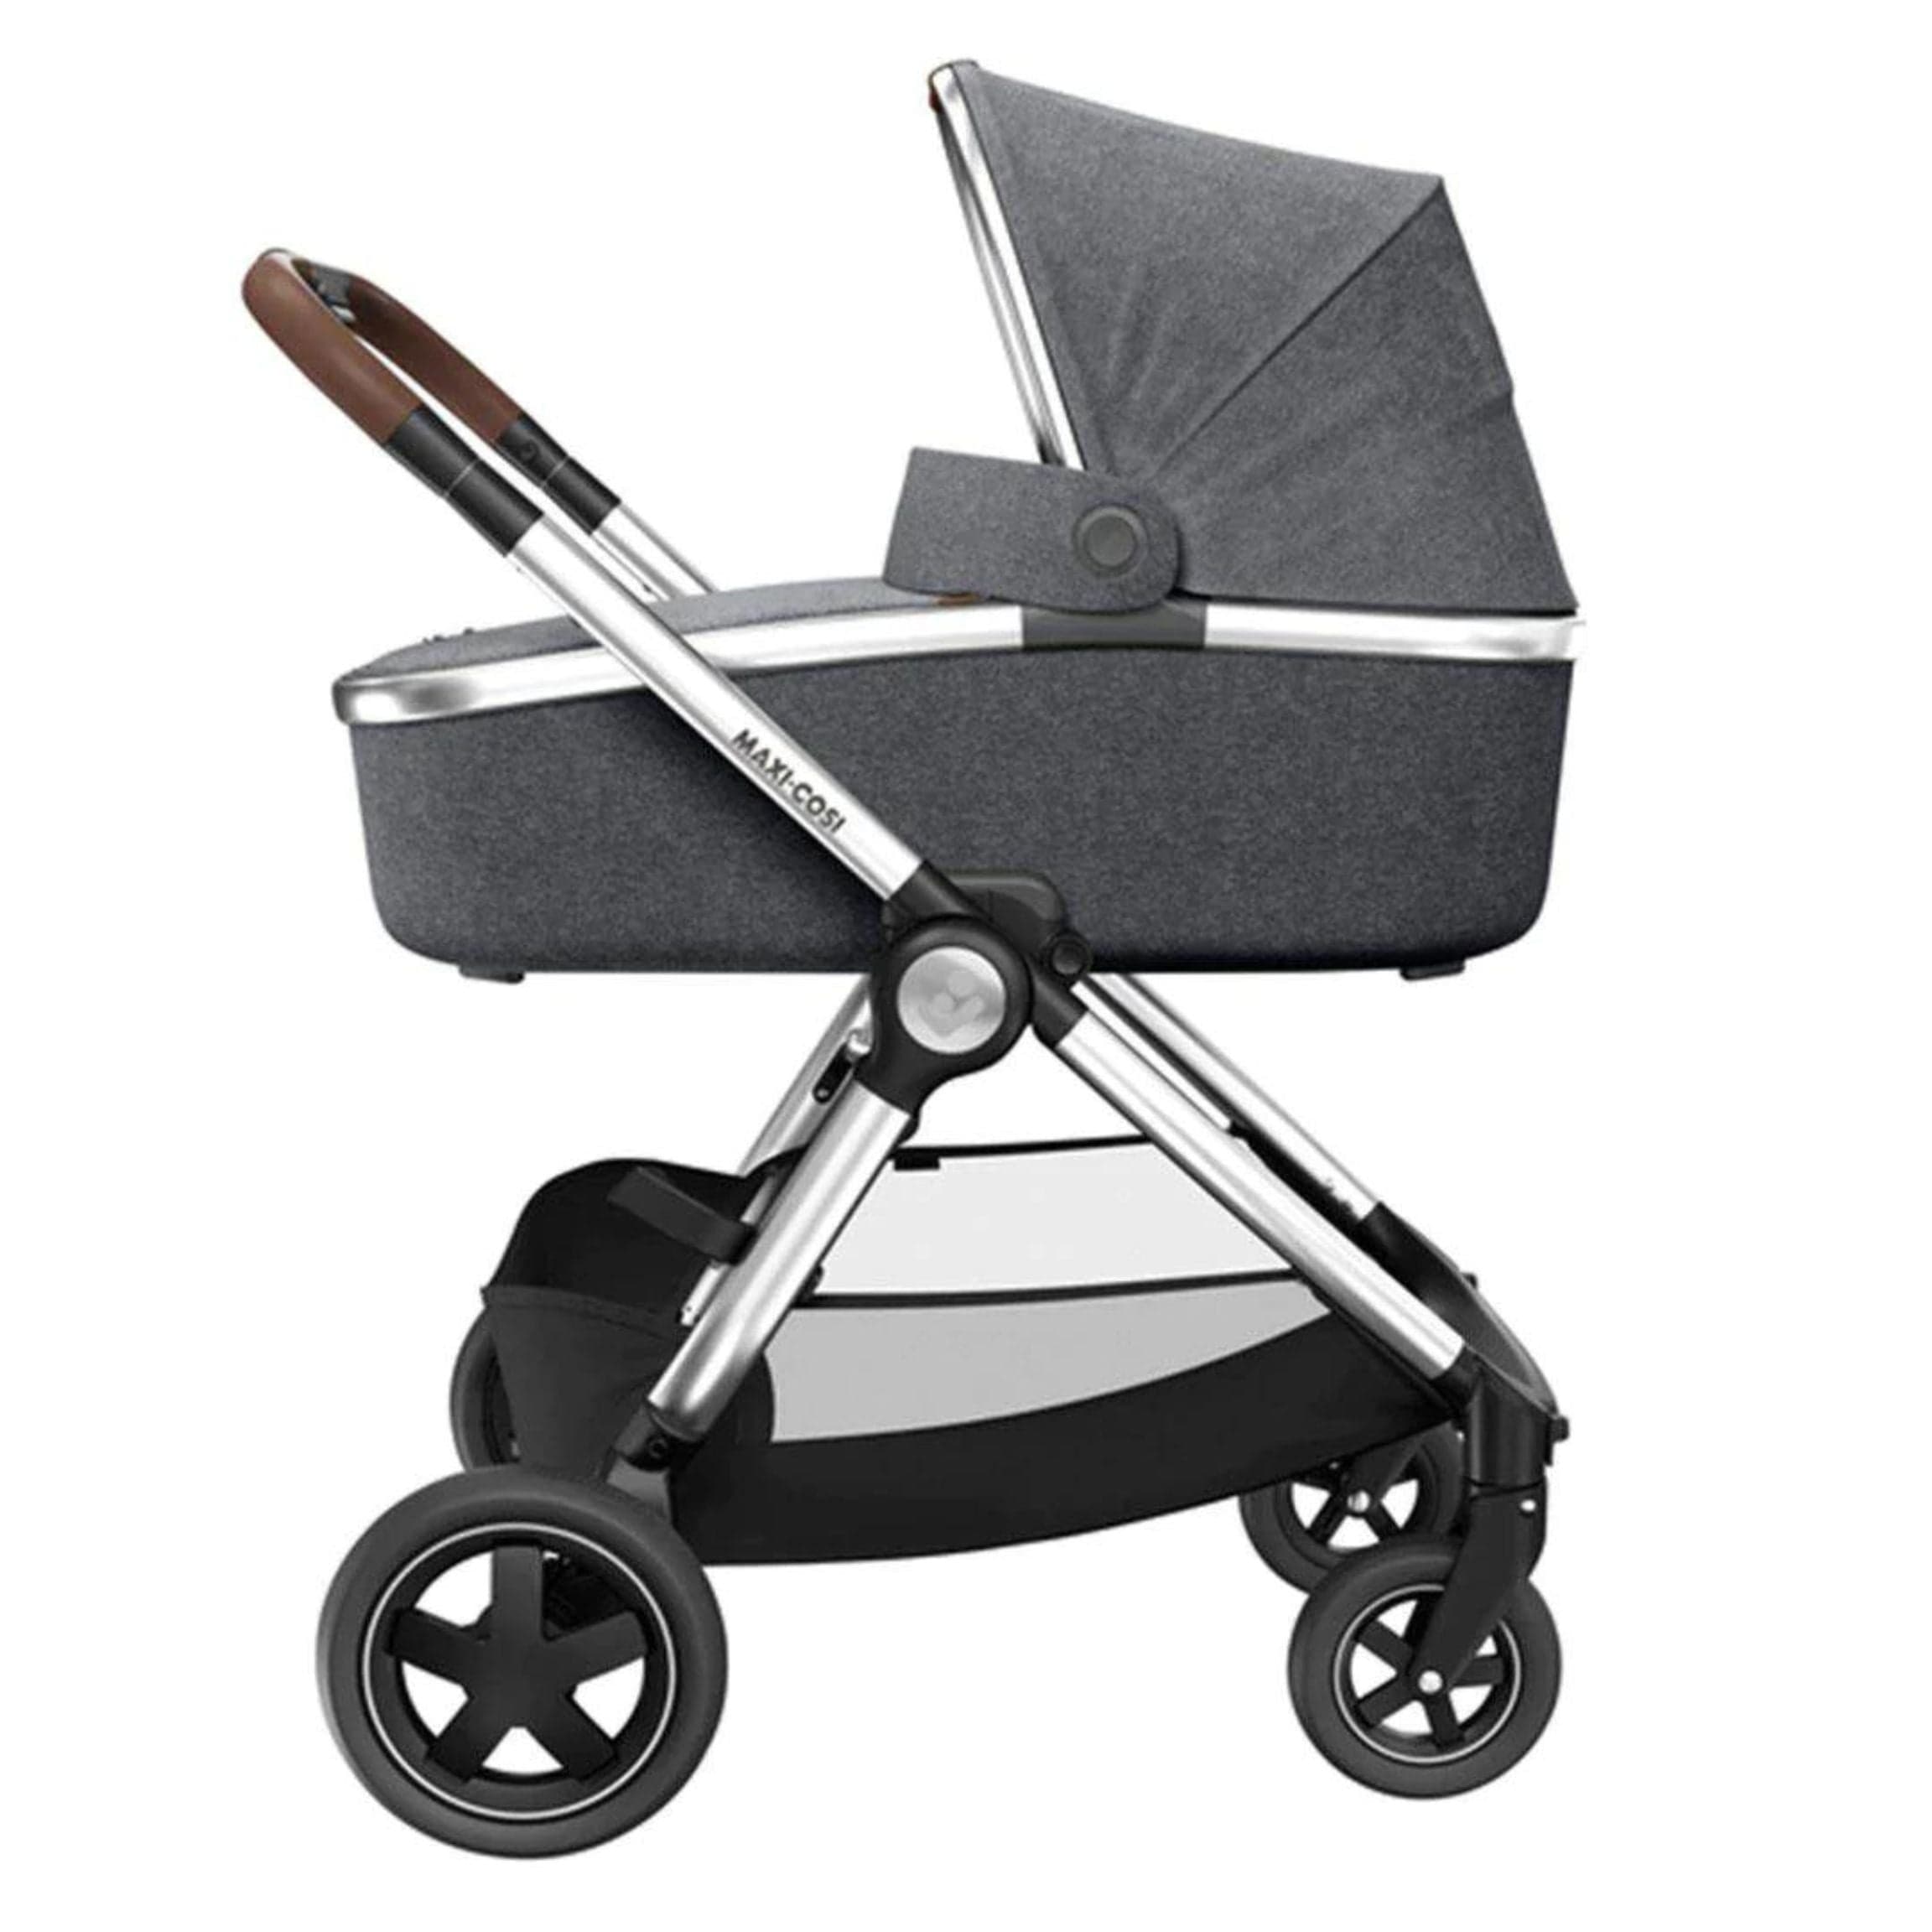 Maxi-Cosi Adorra Luxe Pebble 360 Travel System in Twillic Grey Travel Systems KF51200000 3220660326686